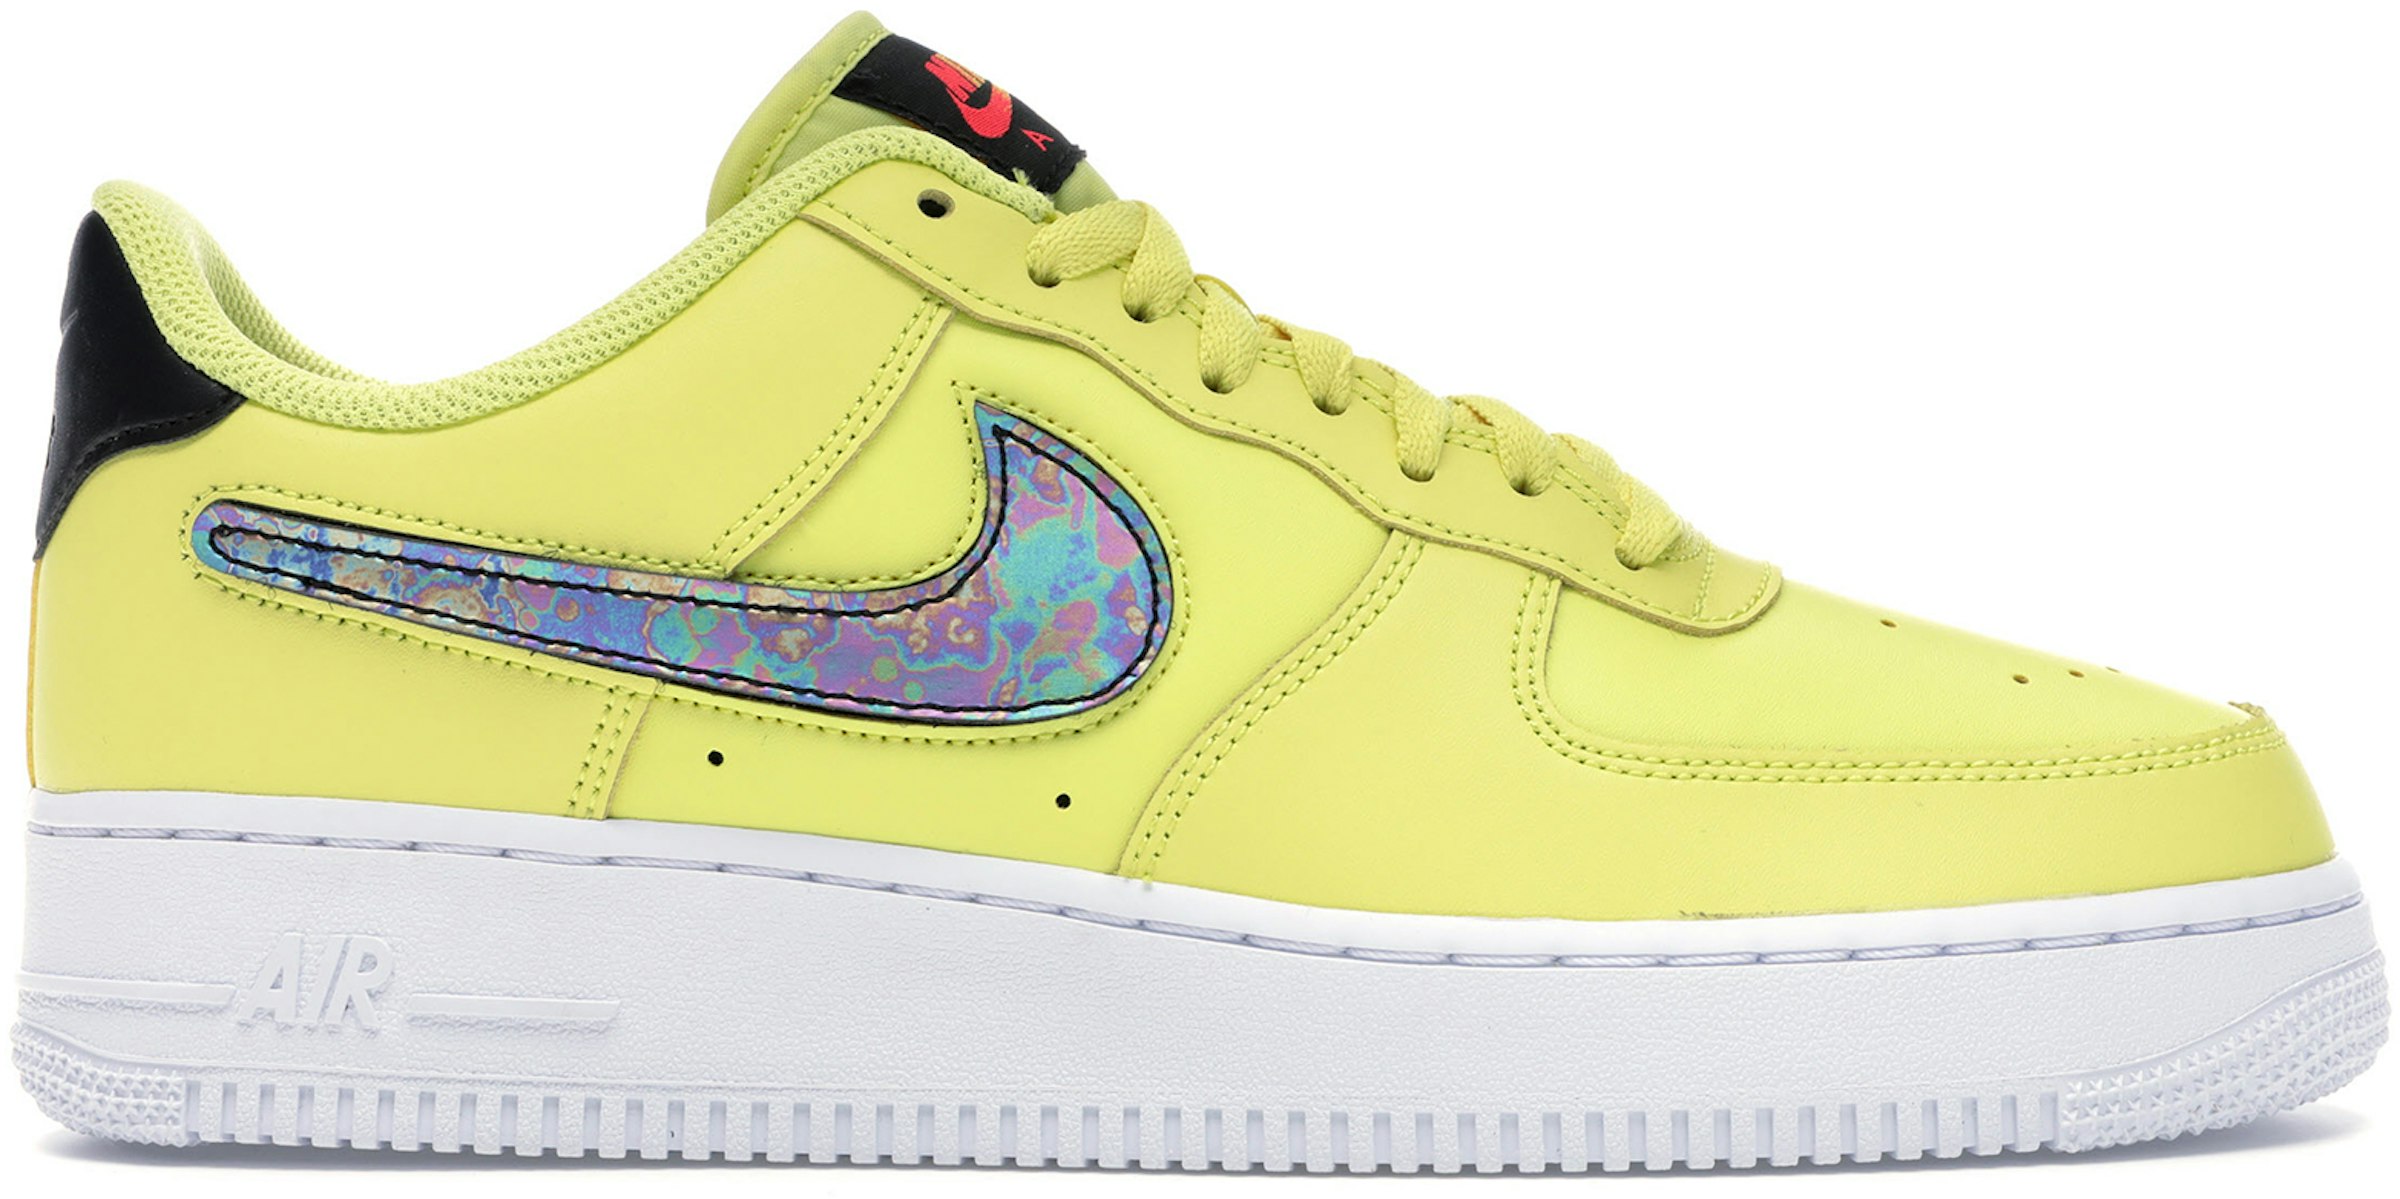 Nike Air Force 1 Low Yellow - CI0064-700 - US